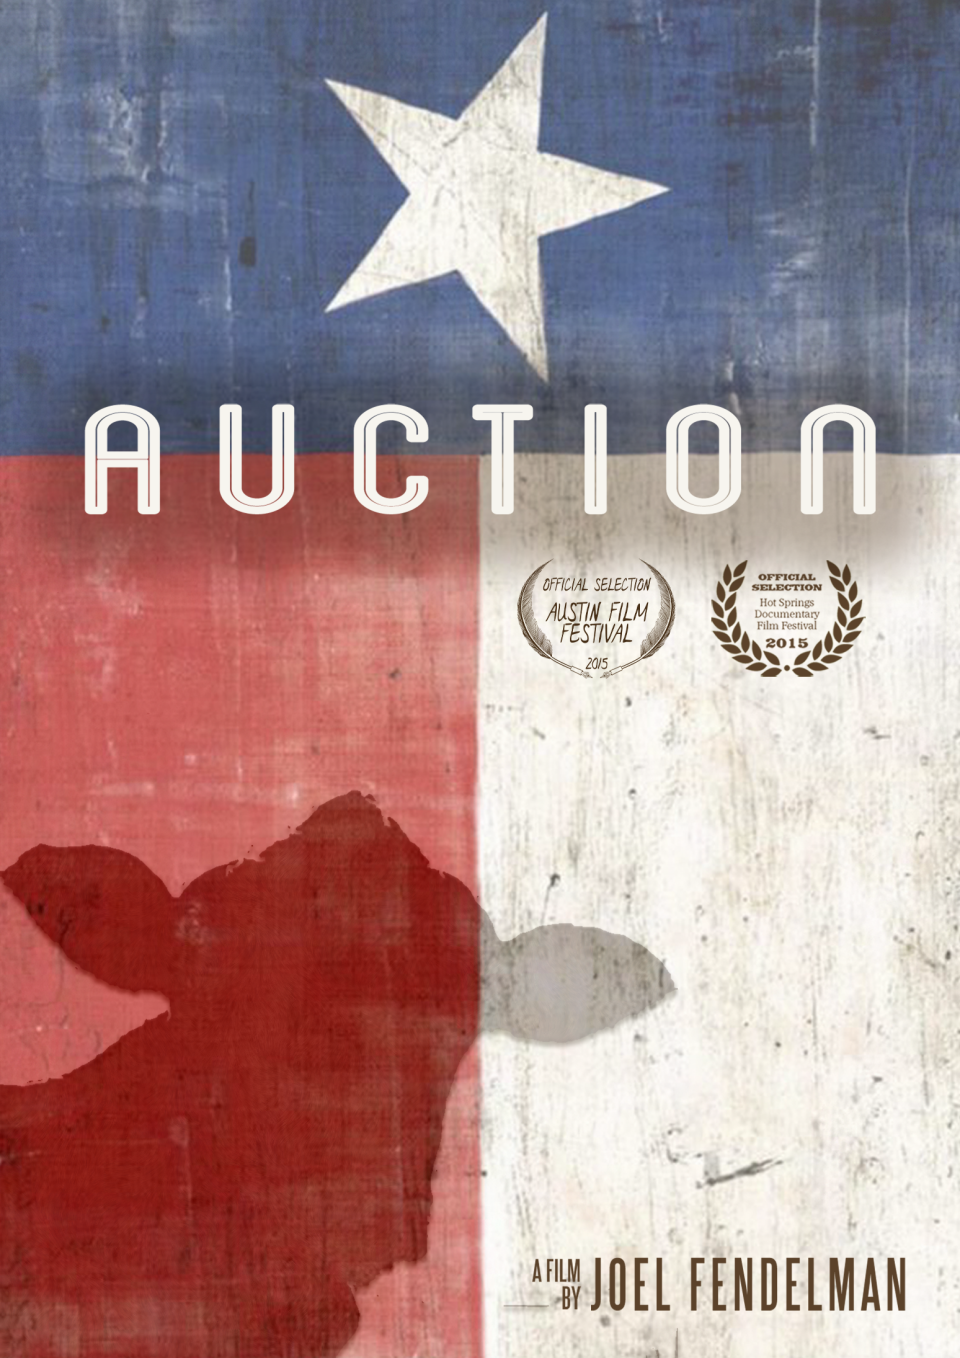 The background is a Texas flag, a large white star sits atop a blue strip with two perpendicular white and red stripes below. The title "Auction" floats above the image of a silhouette cow.